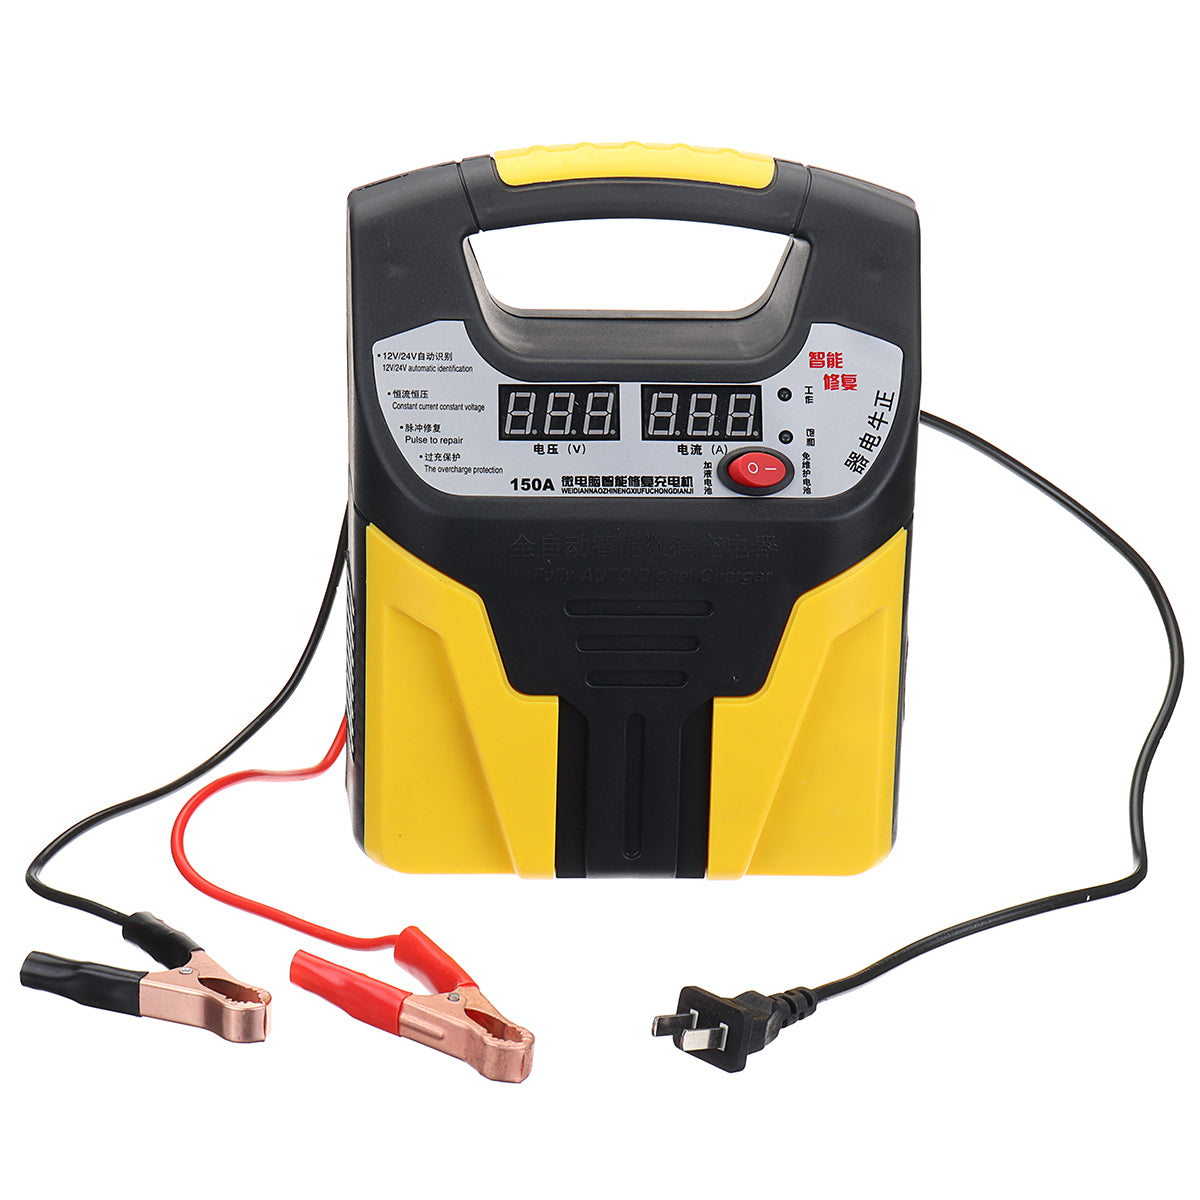 110V 12V/24V Smart Auto Car Battery Charger LCD display Silent Pulse Repair Jump Starter Booster Eightfold Safety Protection 35AH-200AH - Auto GoShop